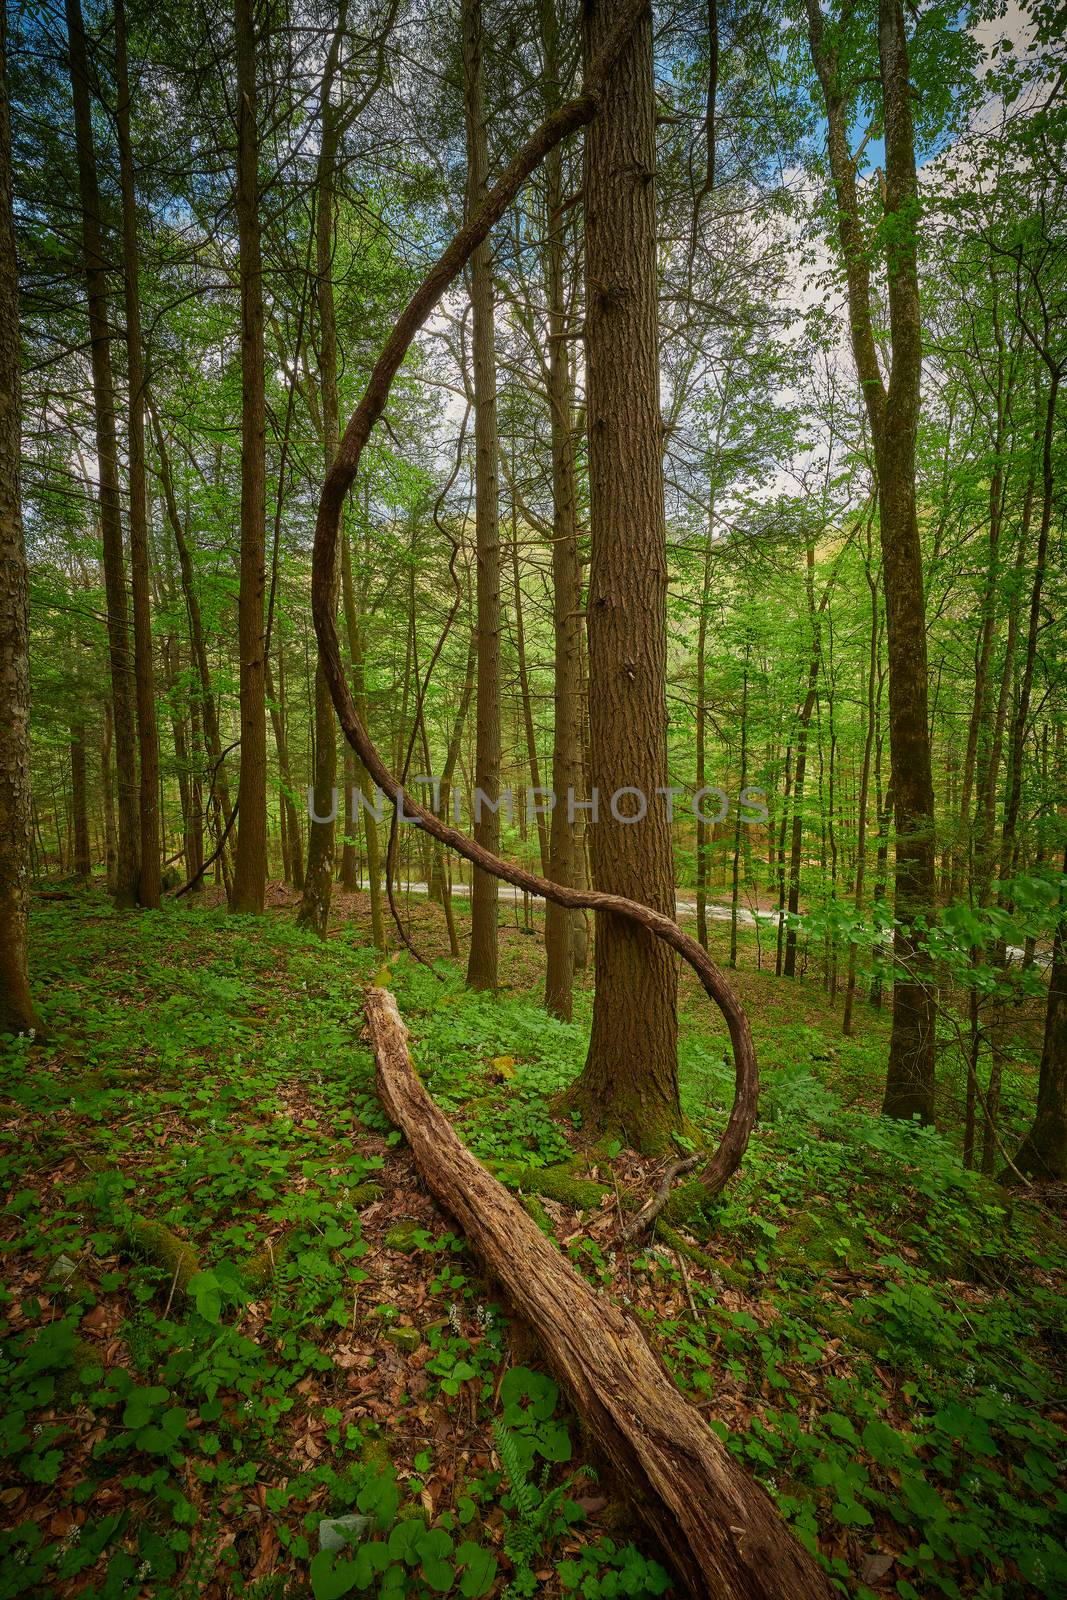 Wild vine formed in a S shape with log in the foreground. by patrickstock